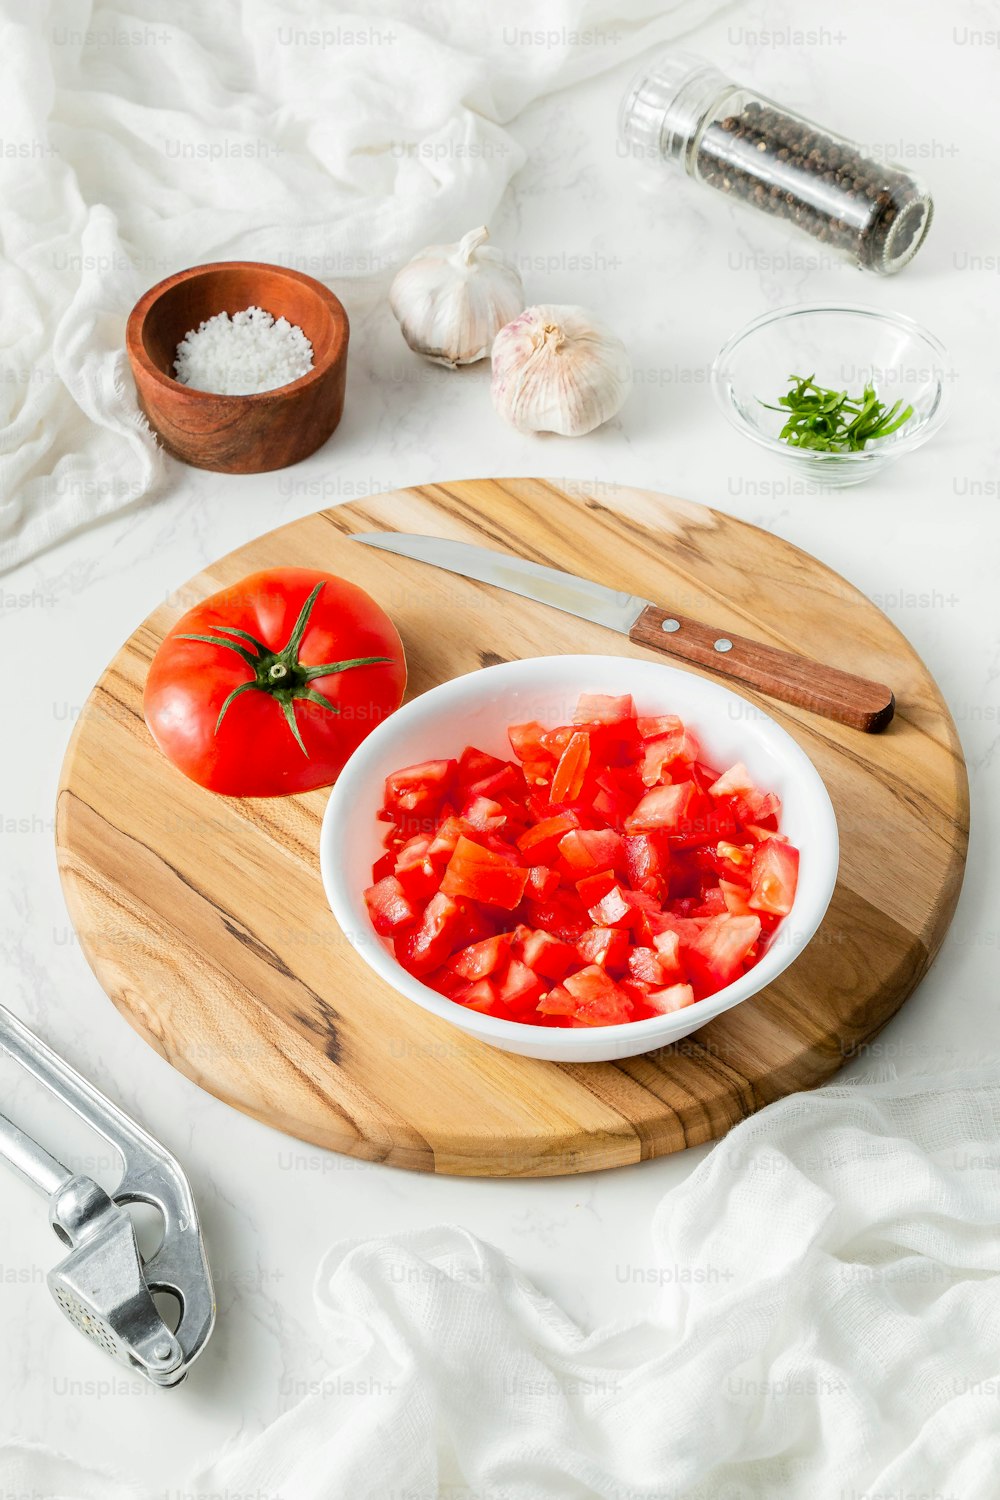 a wooden cutting board topped with a bowl of chopped tomatoes